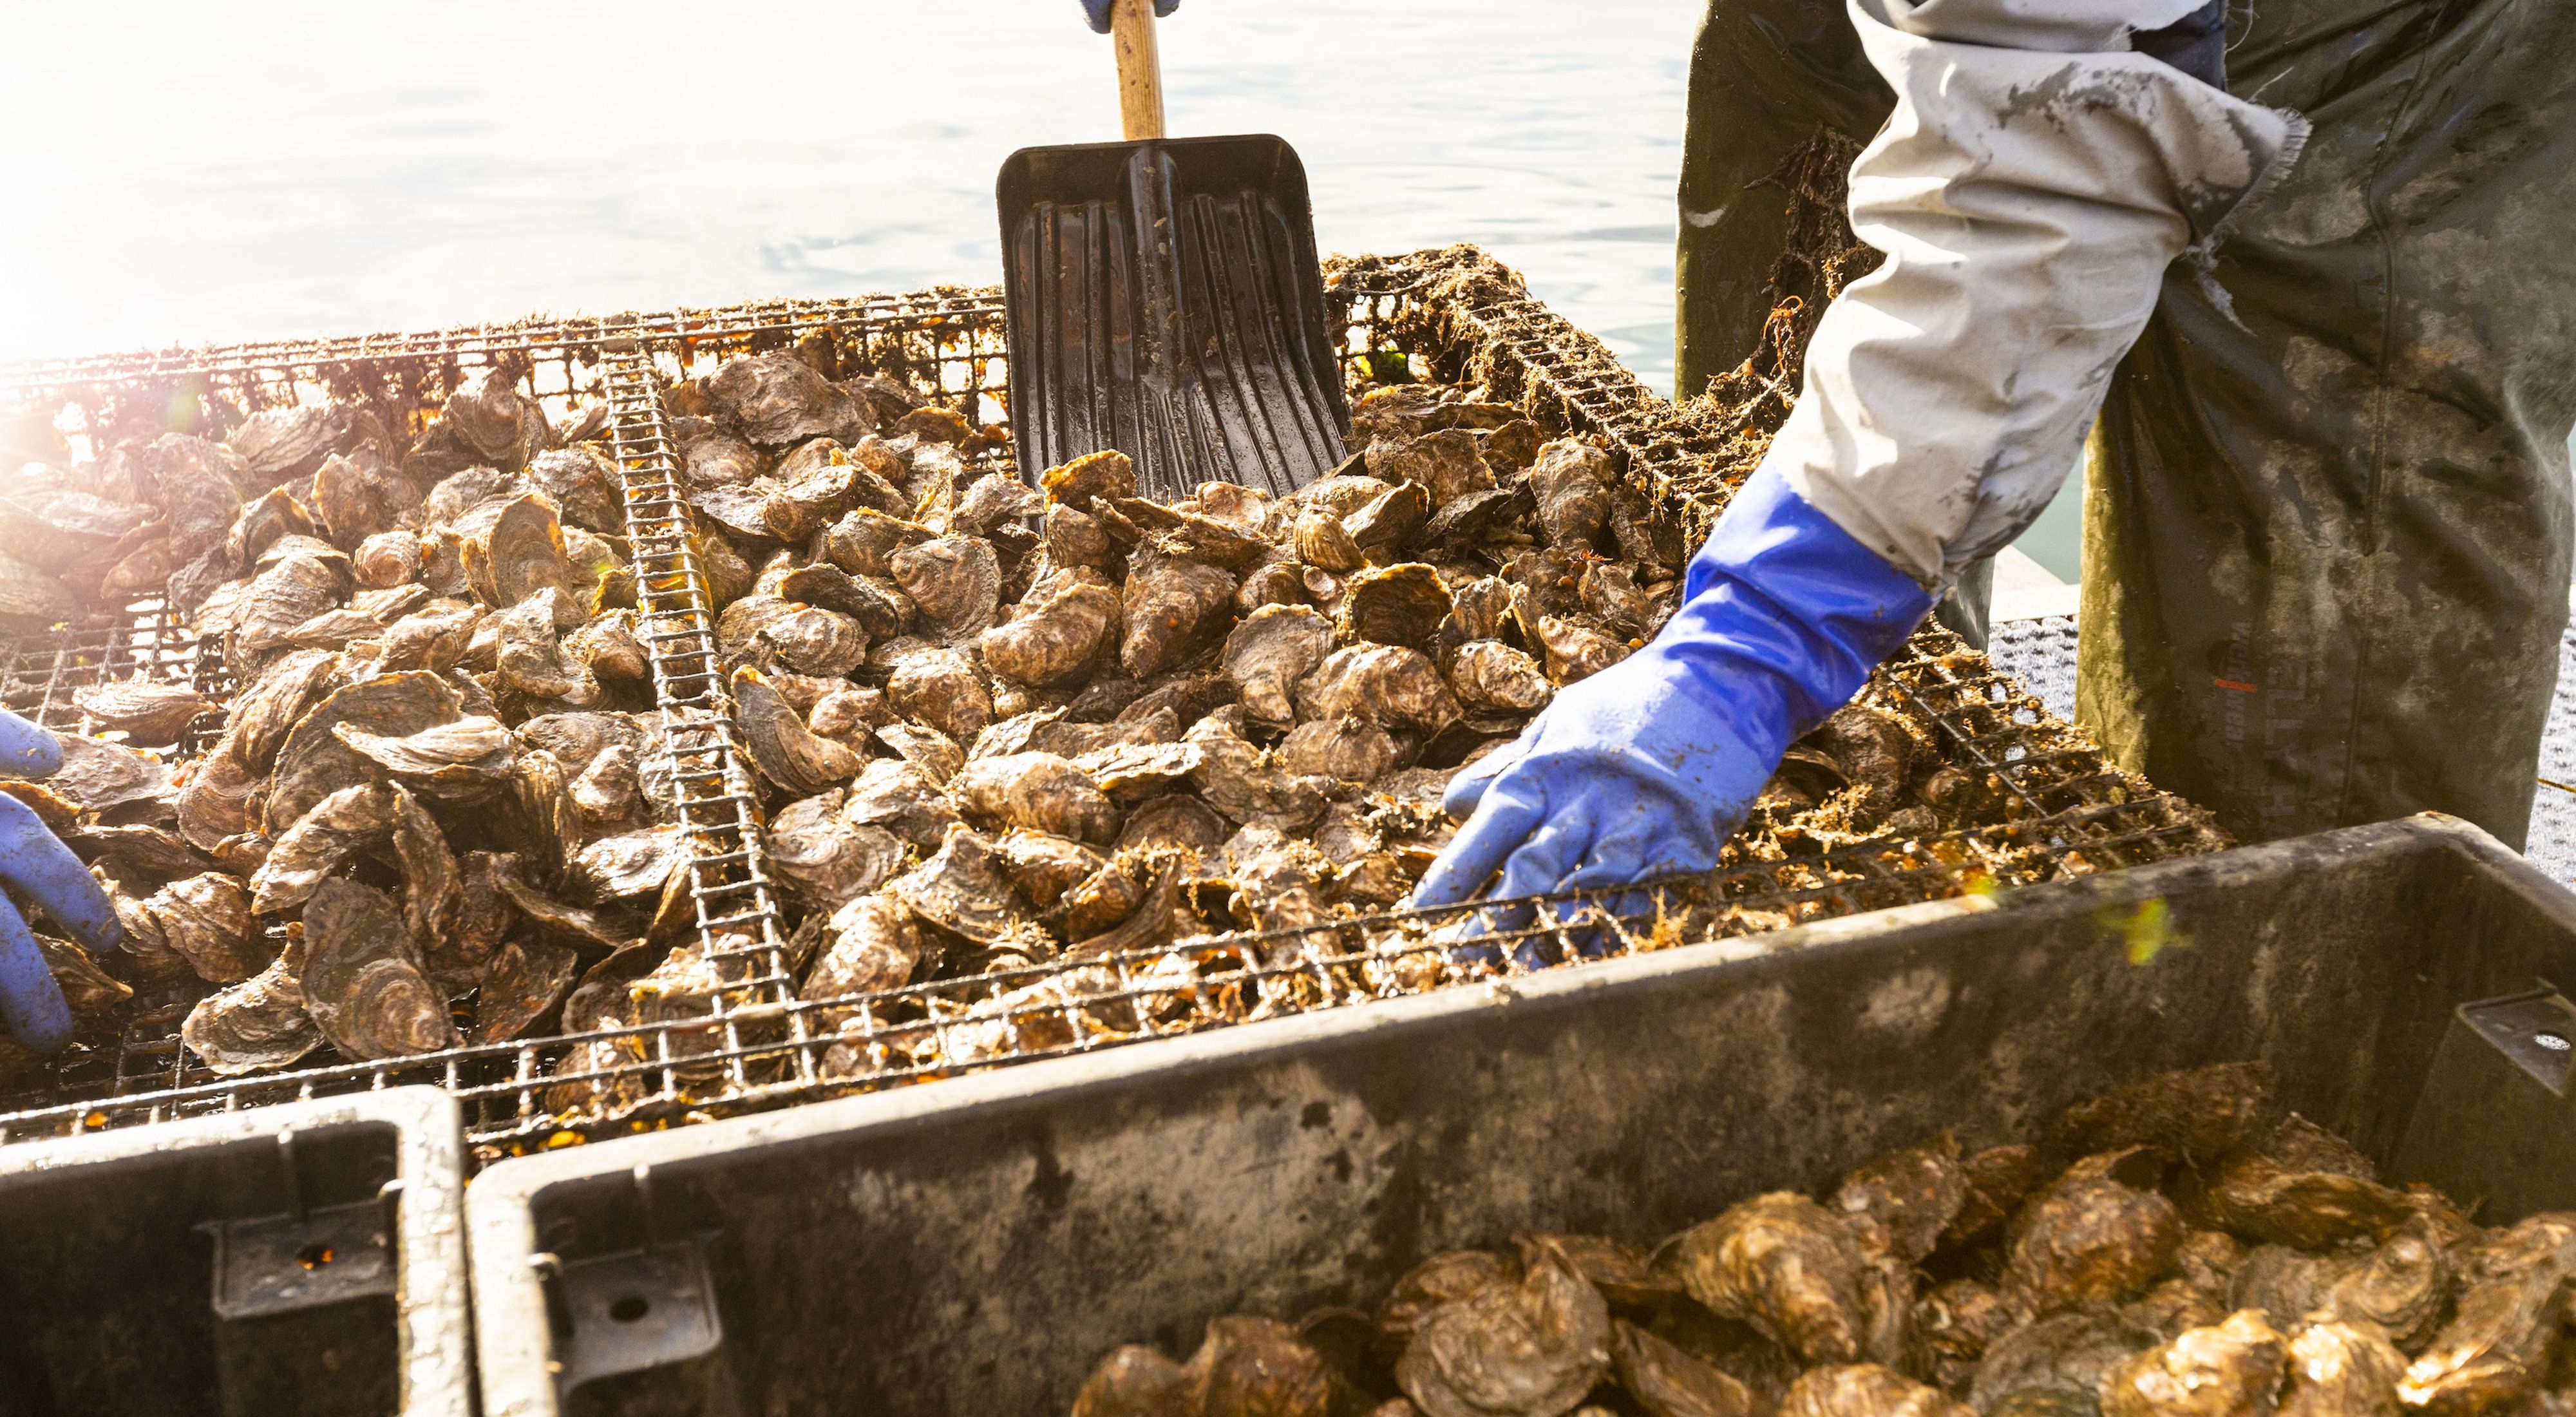 A farmer wearing waders and blue gloves scoops oysters with a shovel.